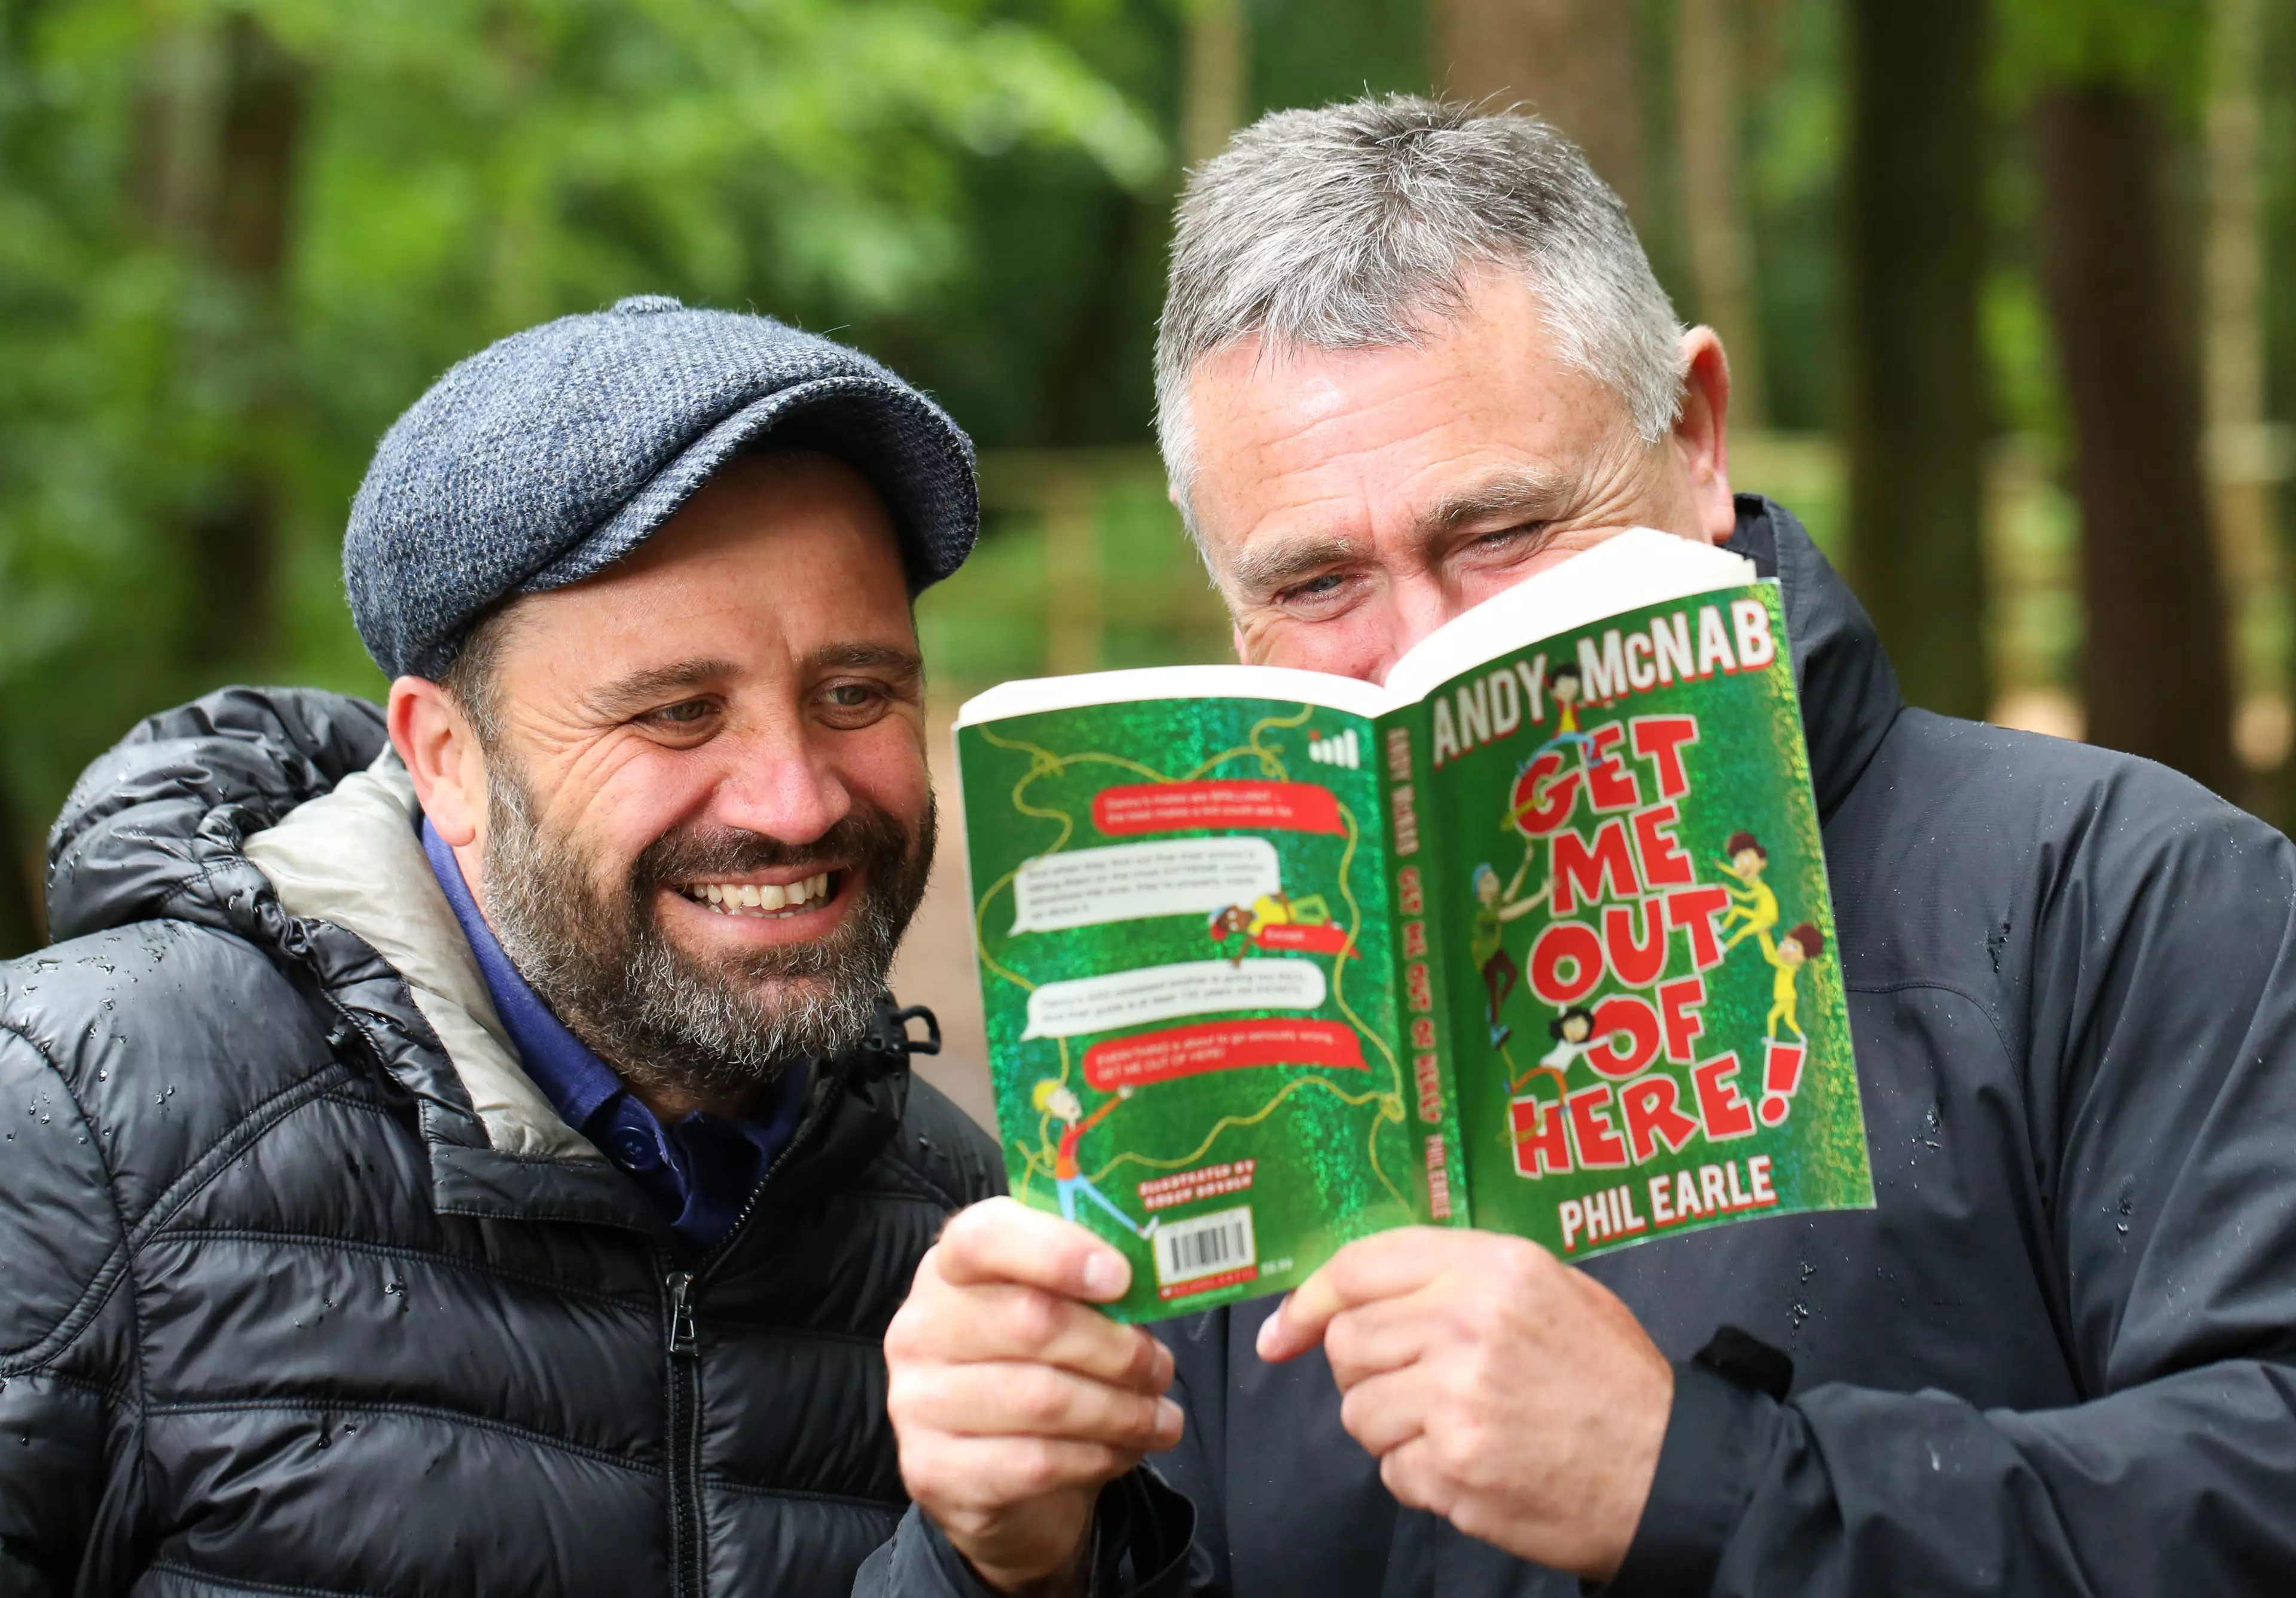 Andy McNab and Phil Earle.